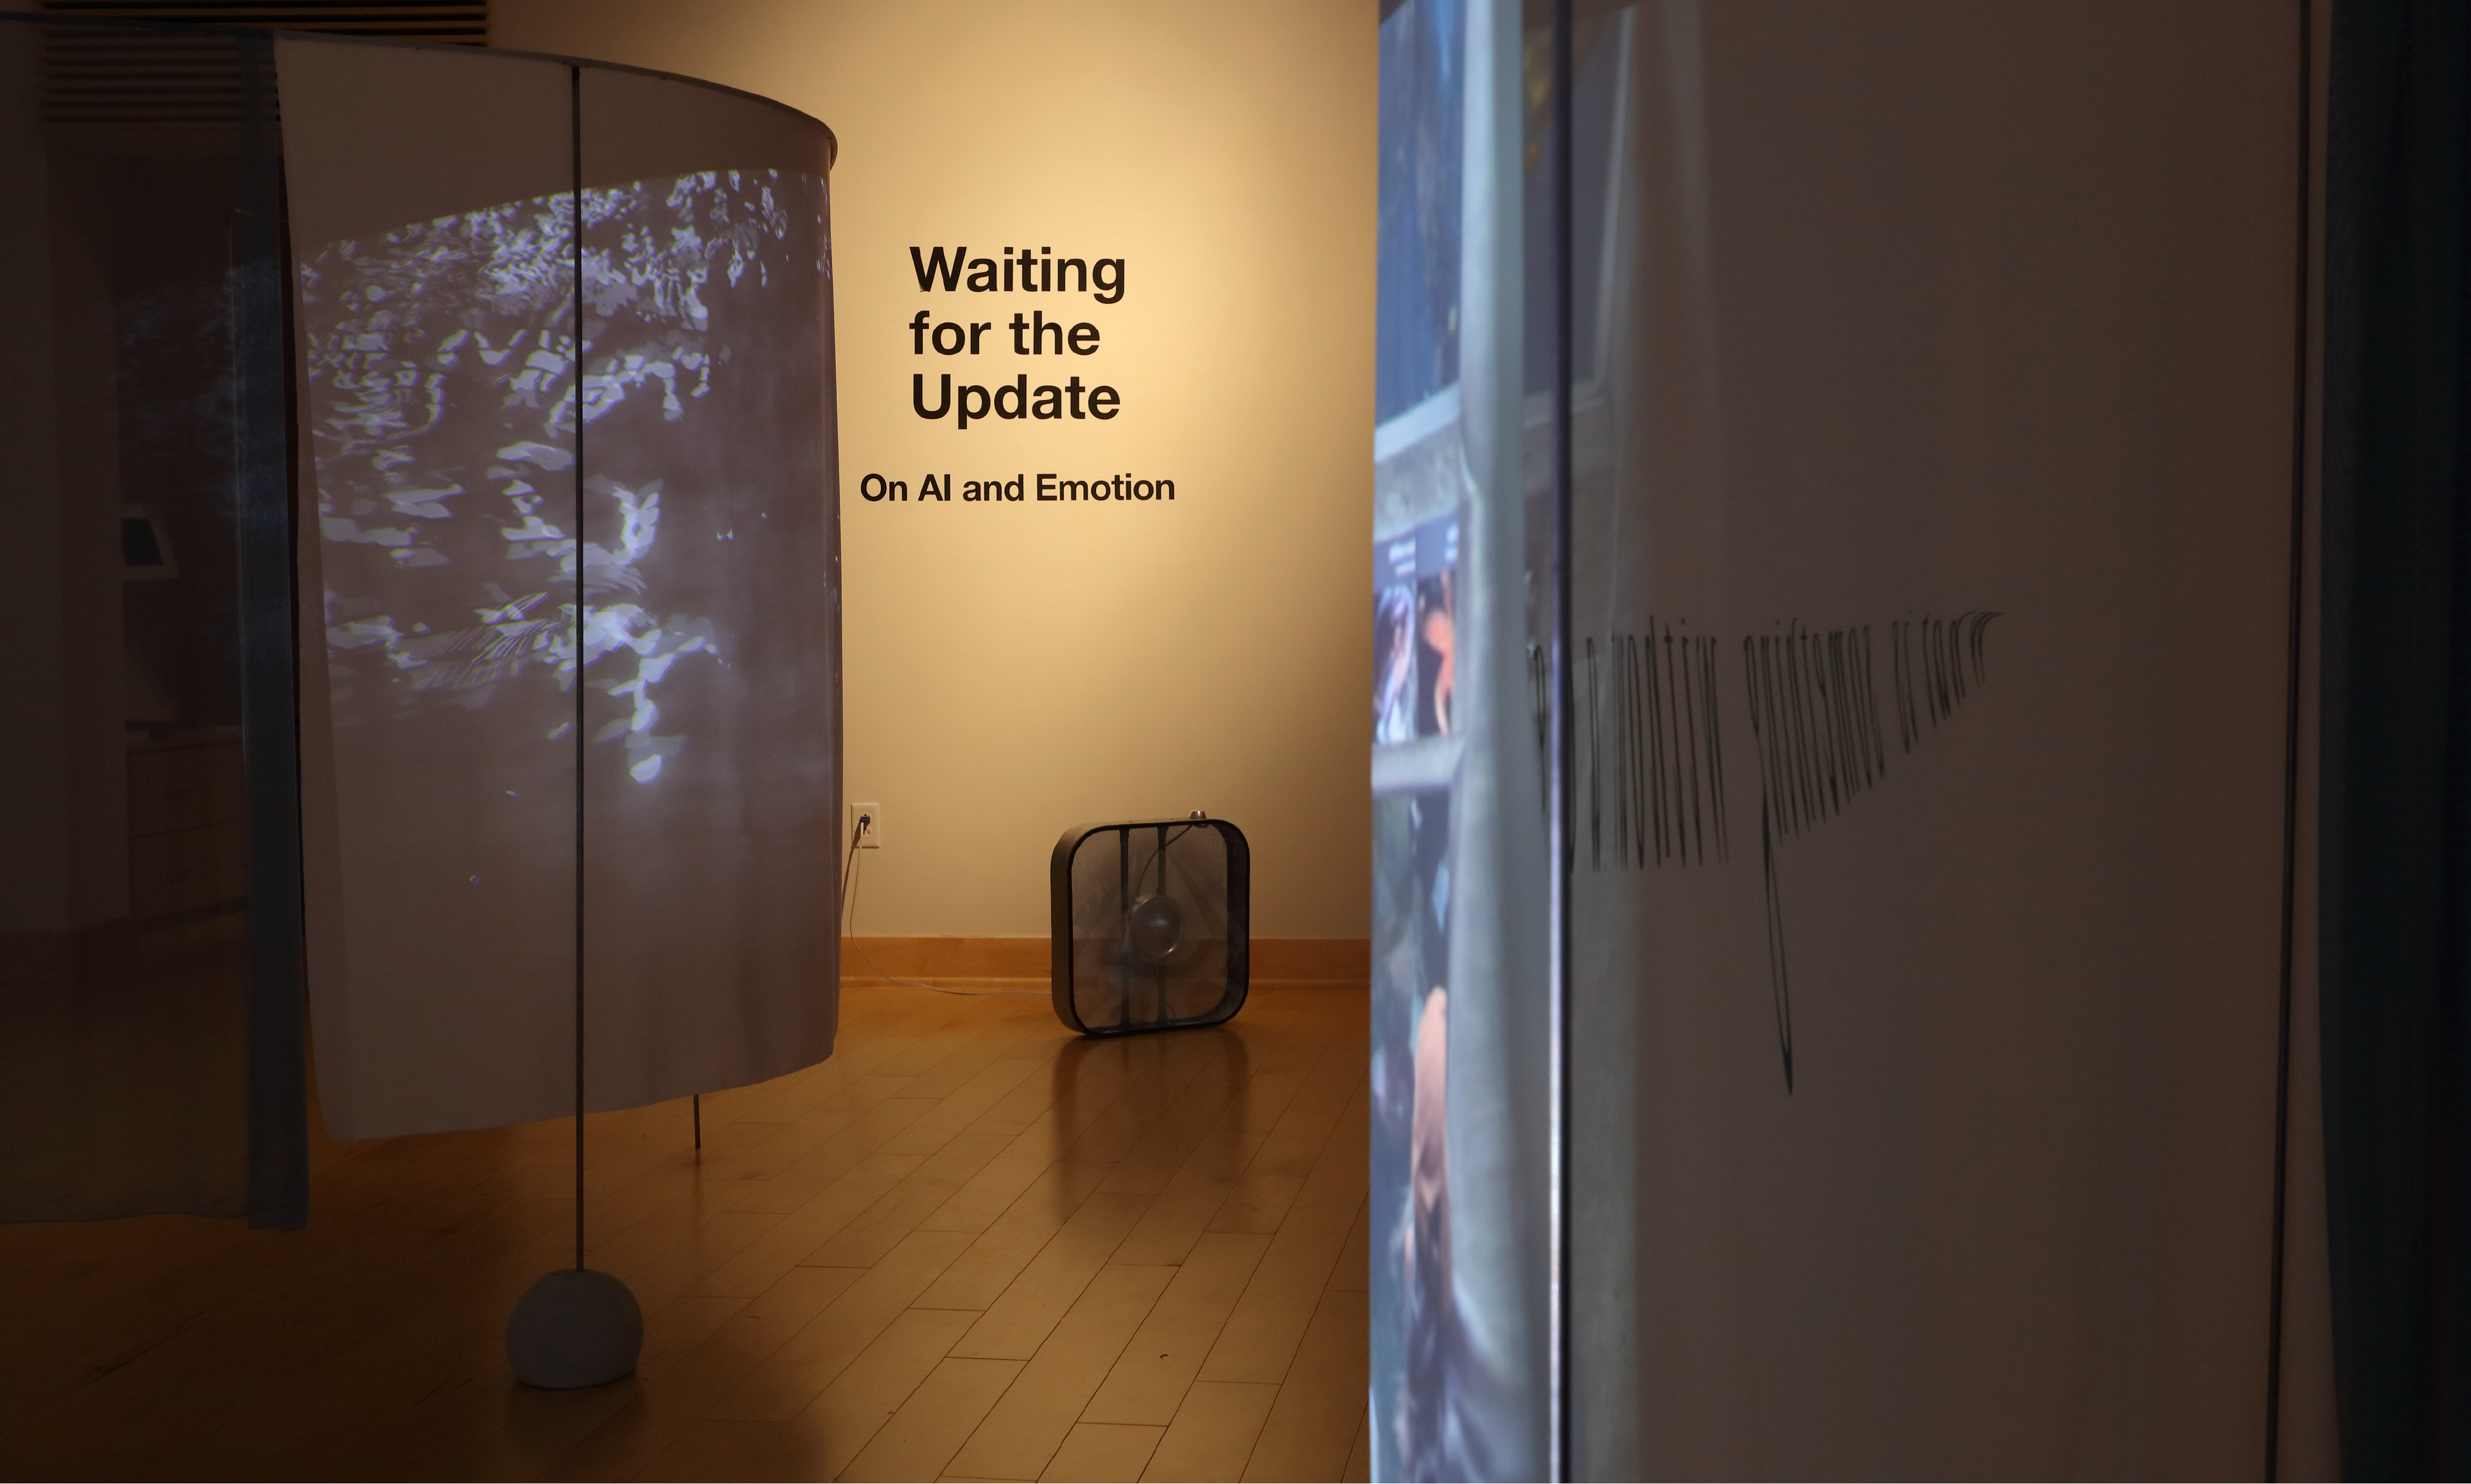 The exhibition's wall text reads: Waiting for the Update, On AI and Emotion